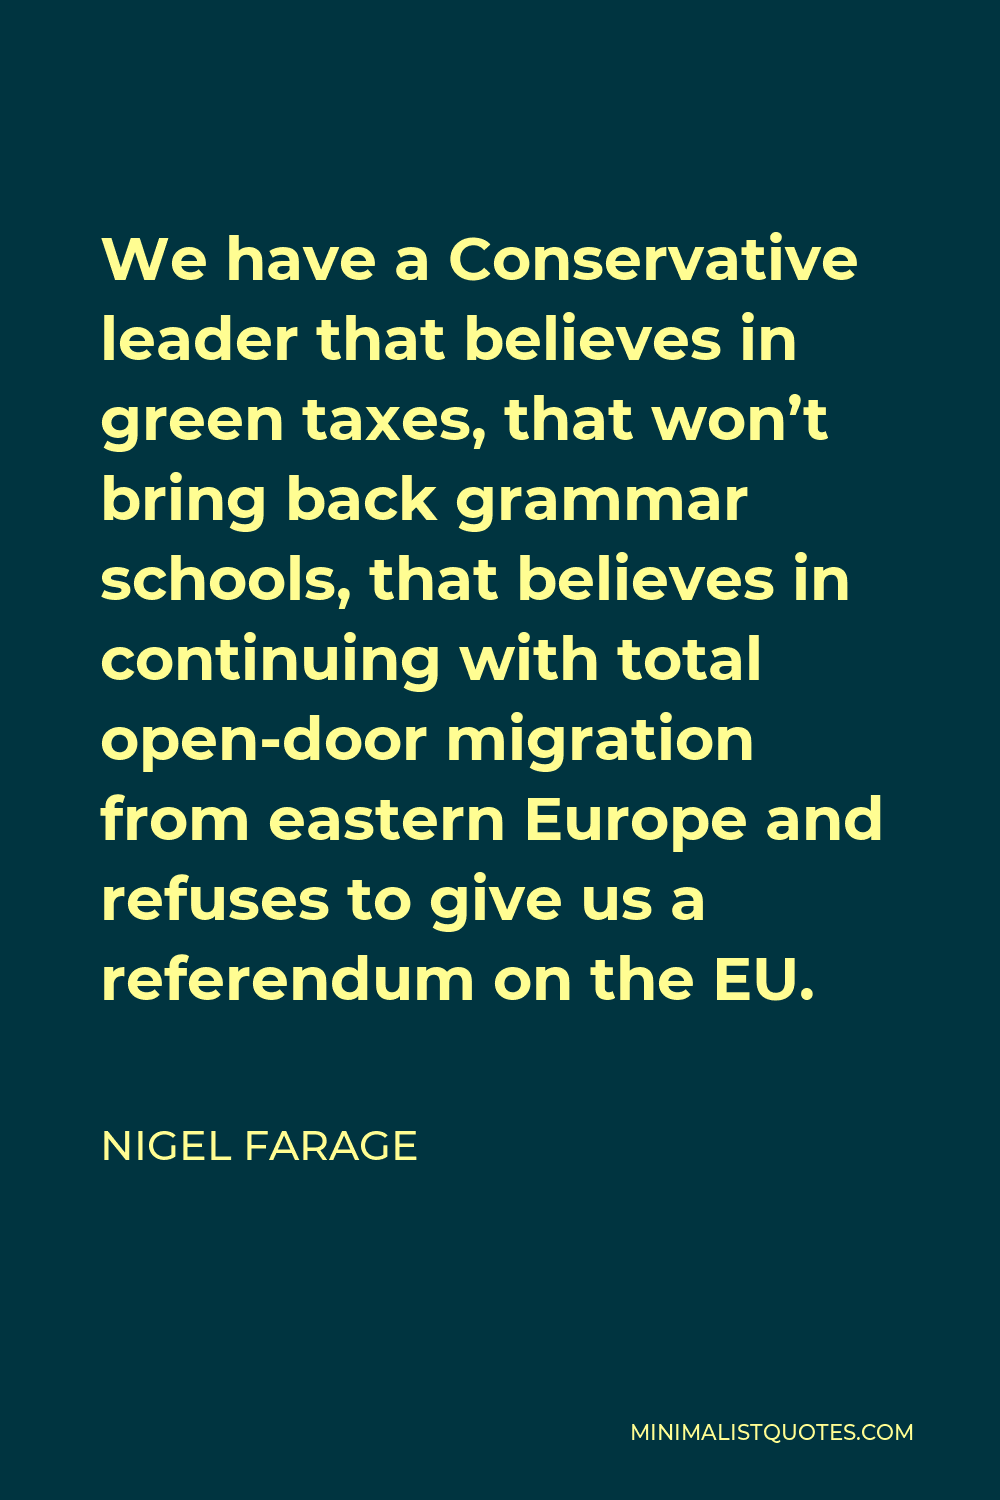 Nigel Farage Quote - We have a Conservative leader that believes in green taxes, that won’t bring back grammar schools, that believes in continuing with total open-door migration from eastern Europe and refuses to give us a referendum on the EU.